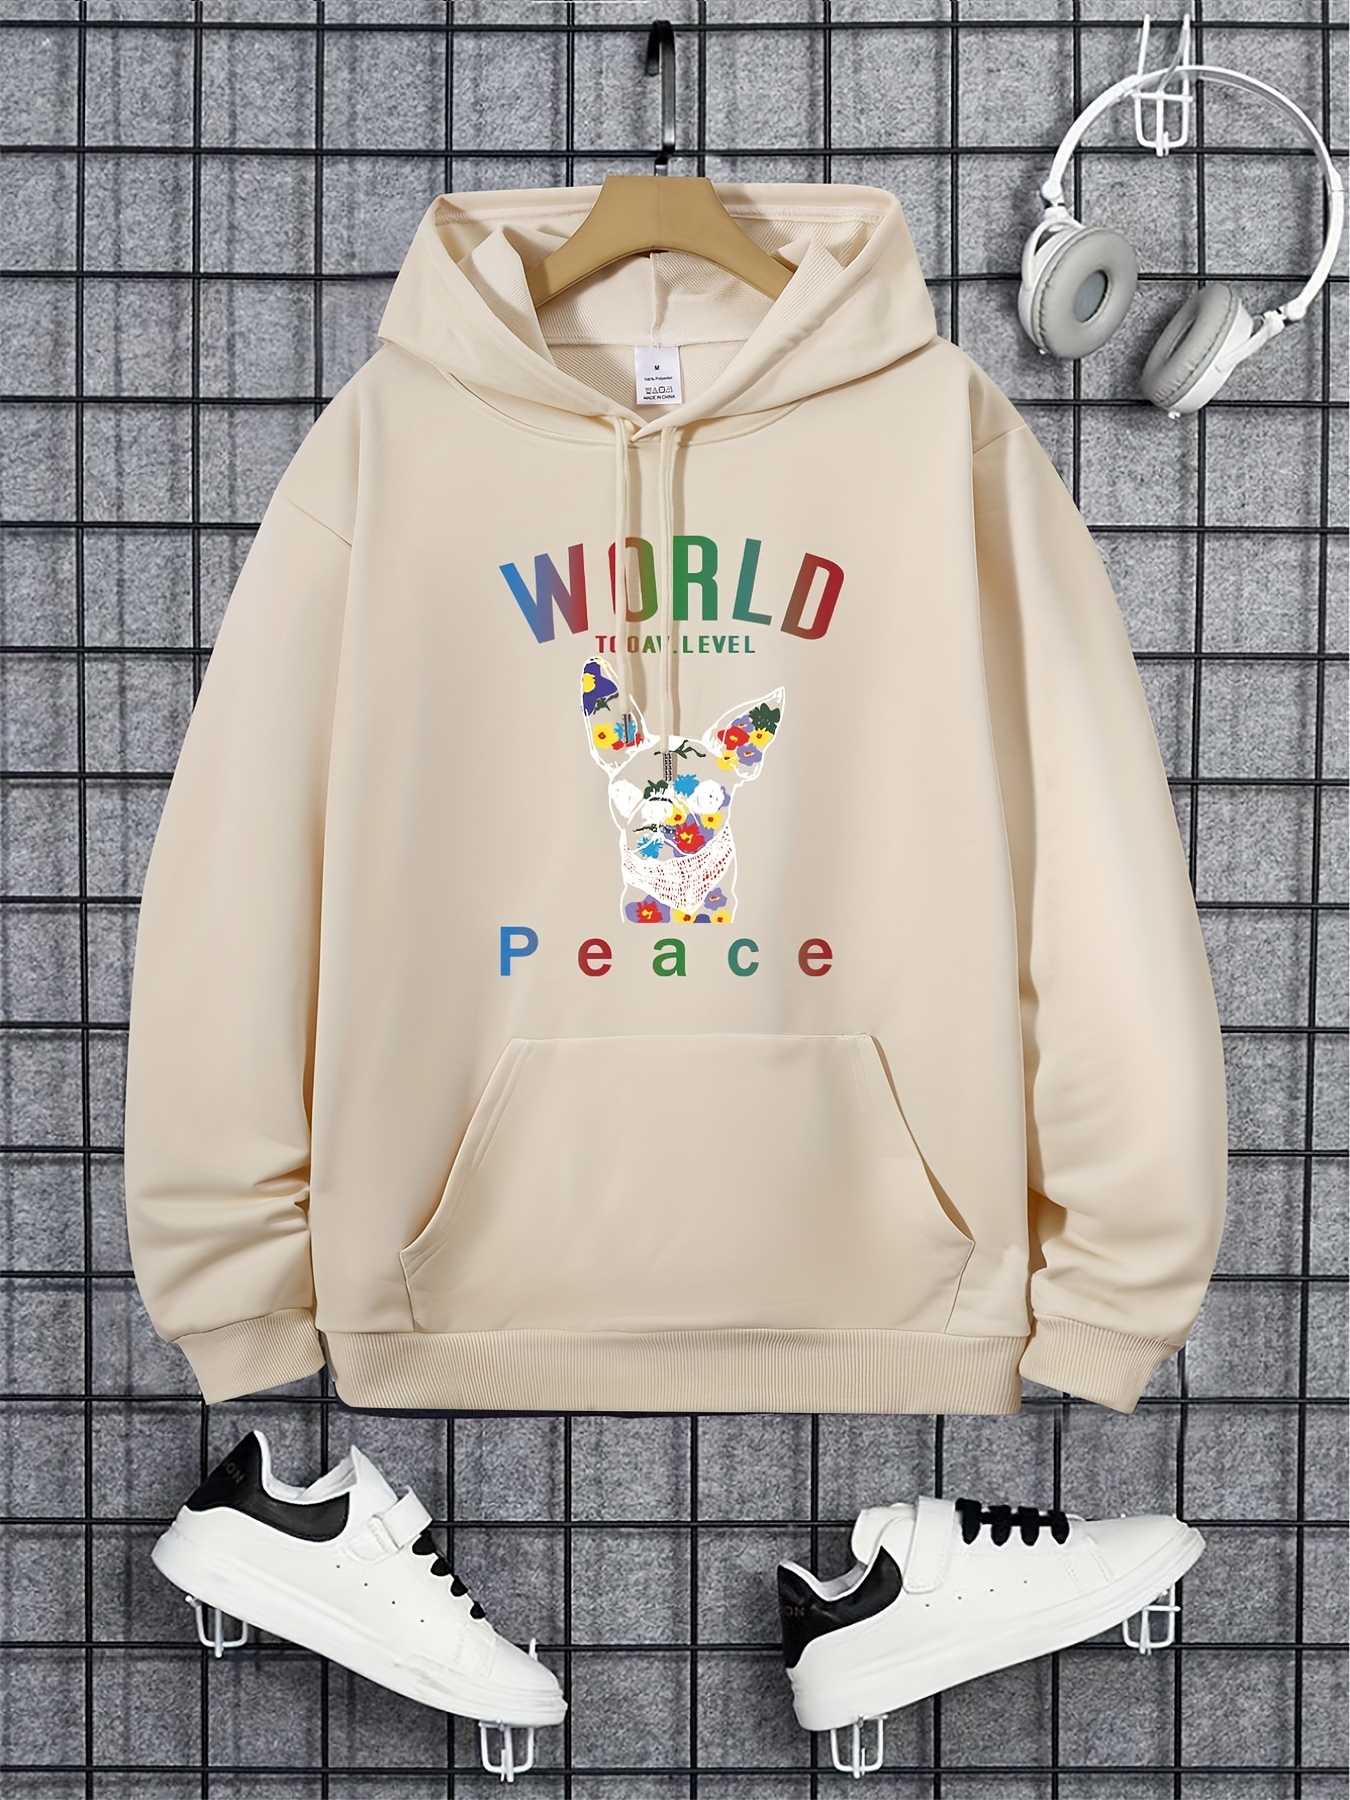 LV Peace & Love Sweater  Sweaters, Clothes design, Graphic sweatshirt